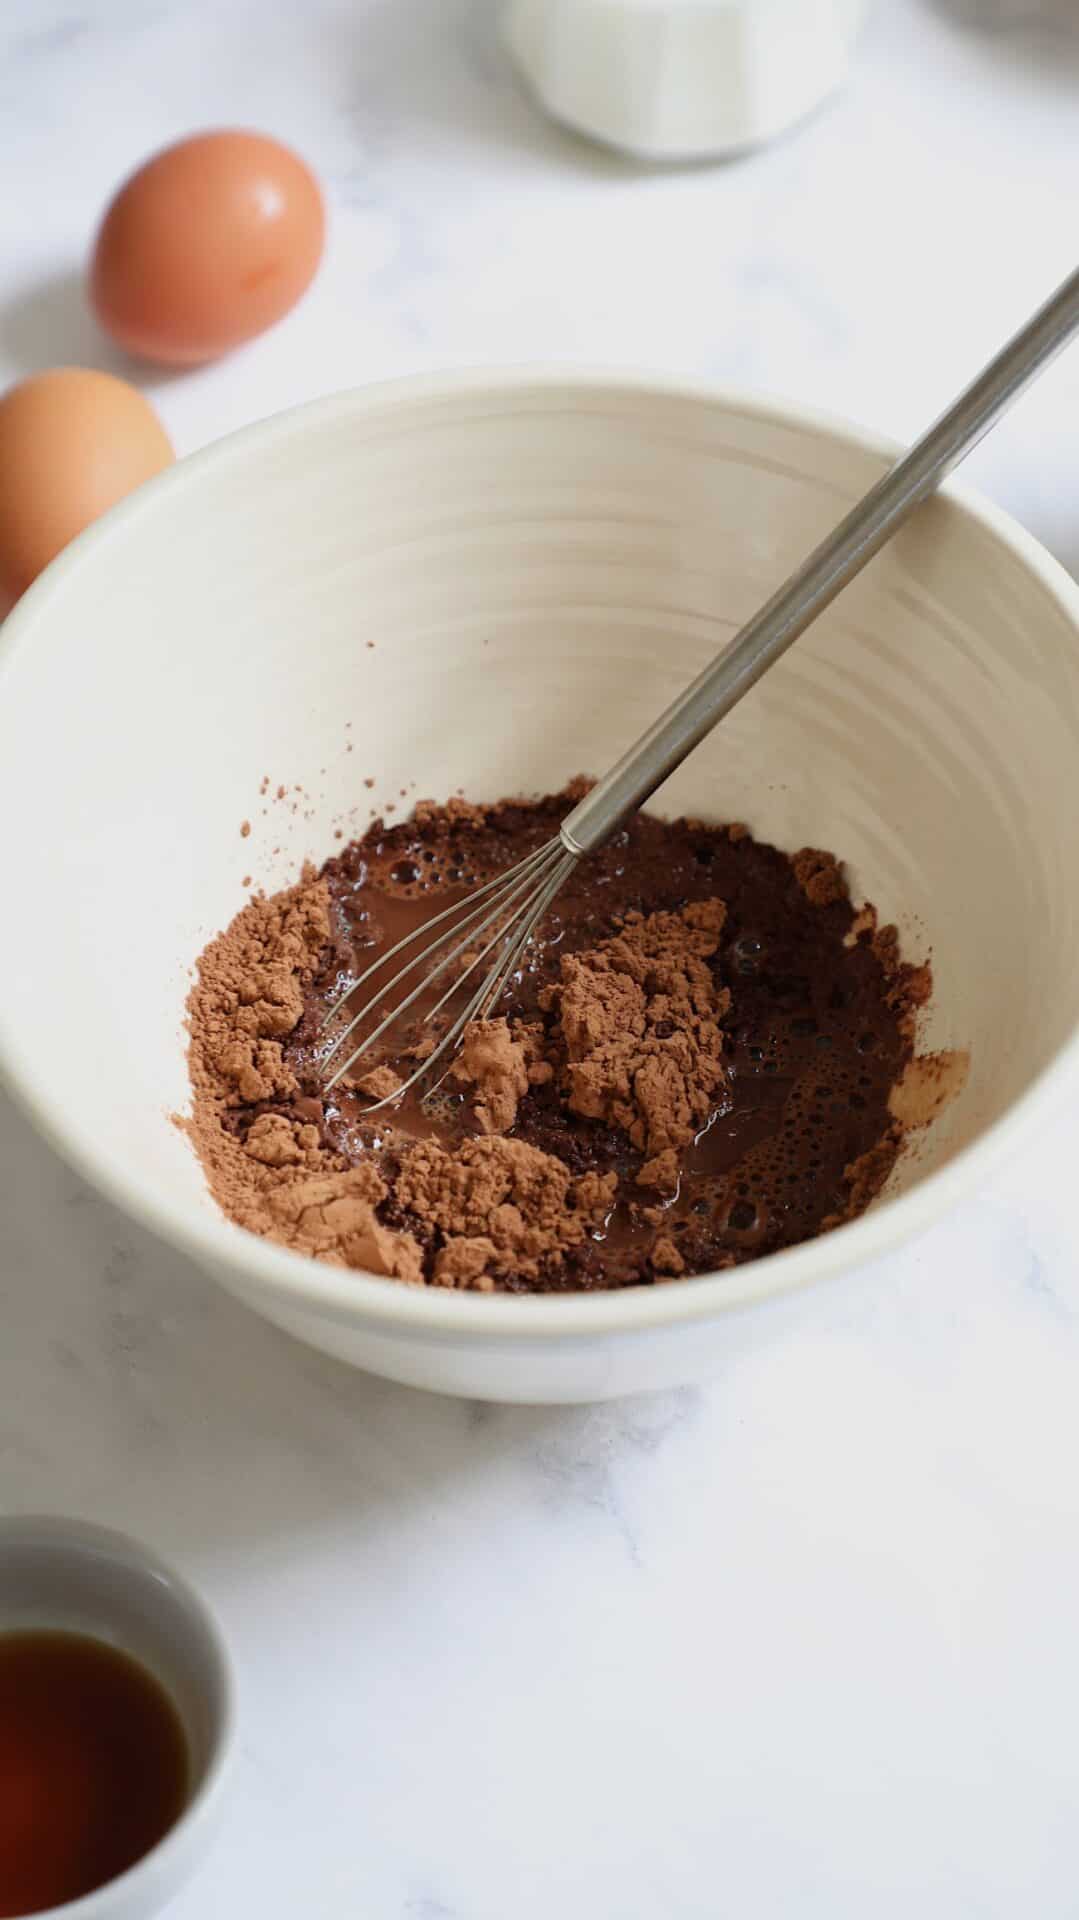 Hot water, chocolate chips and unsweetened cocoa powder in a bowlcocoa 